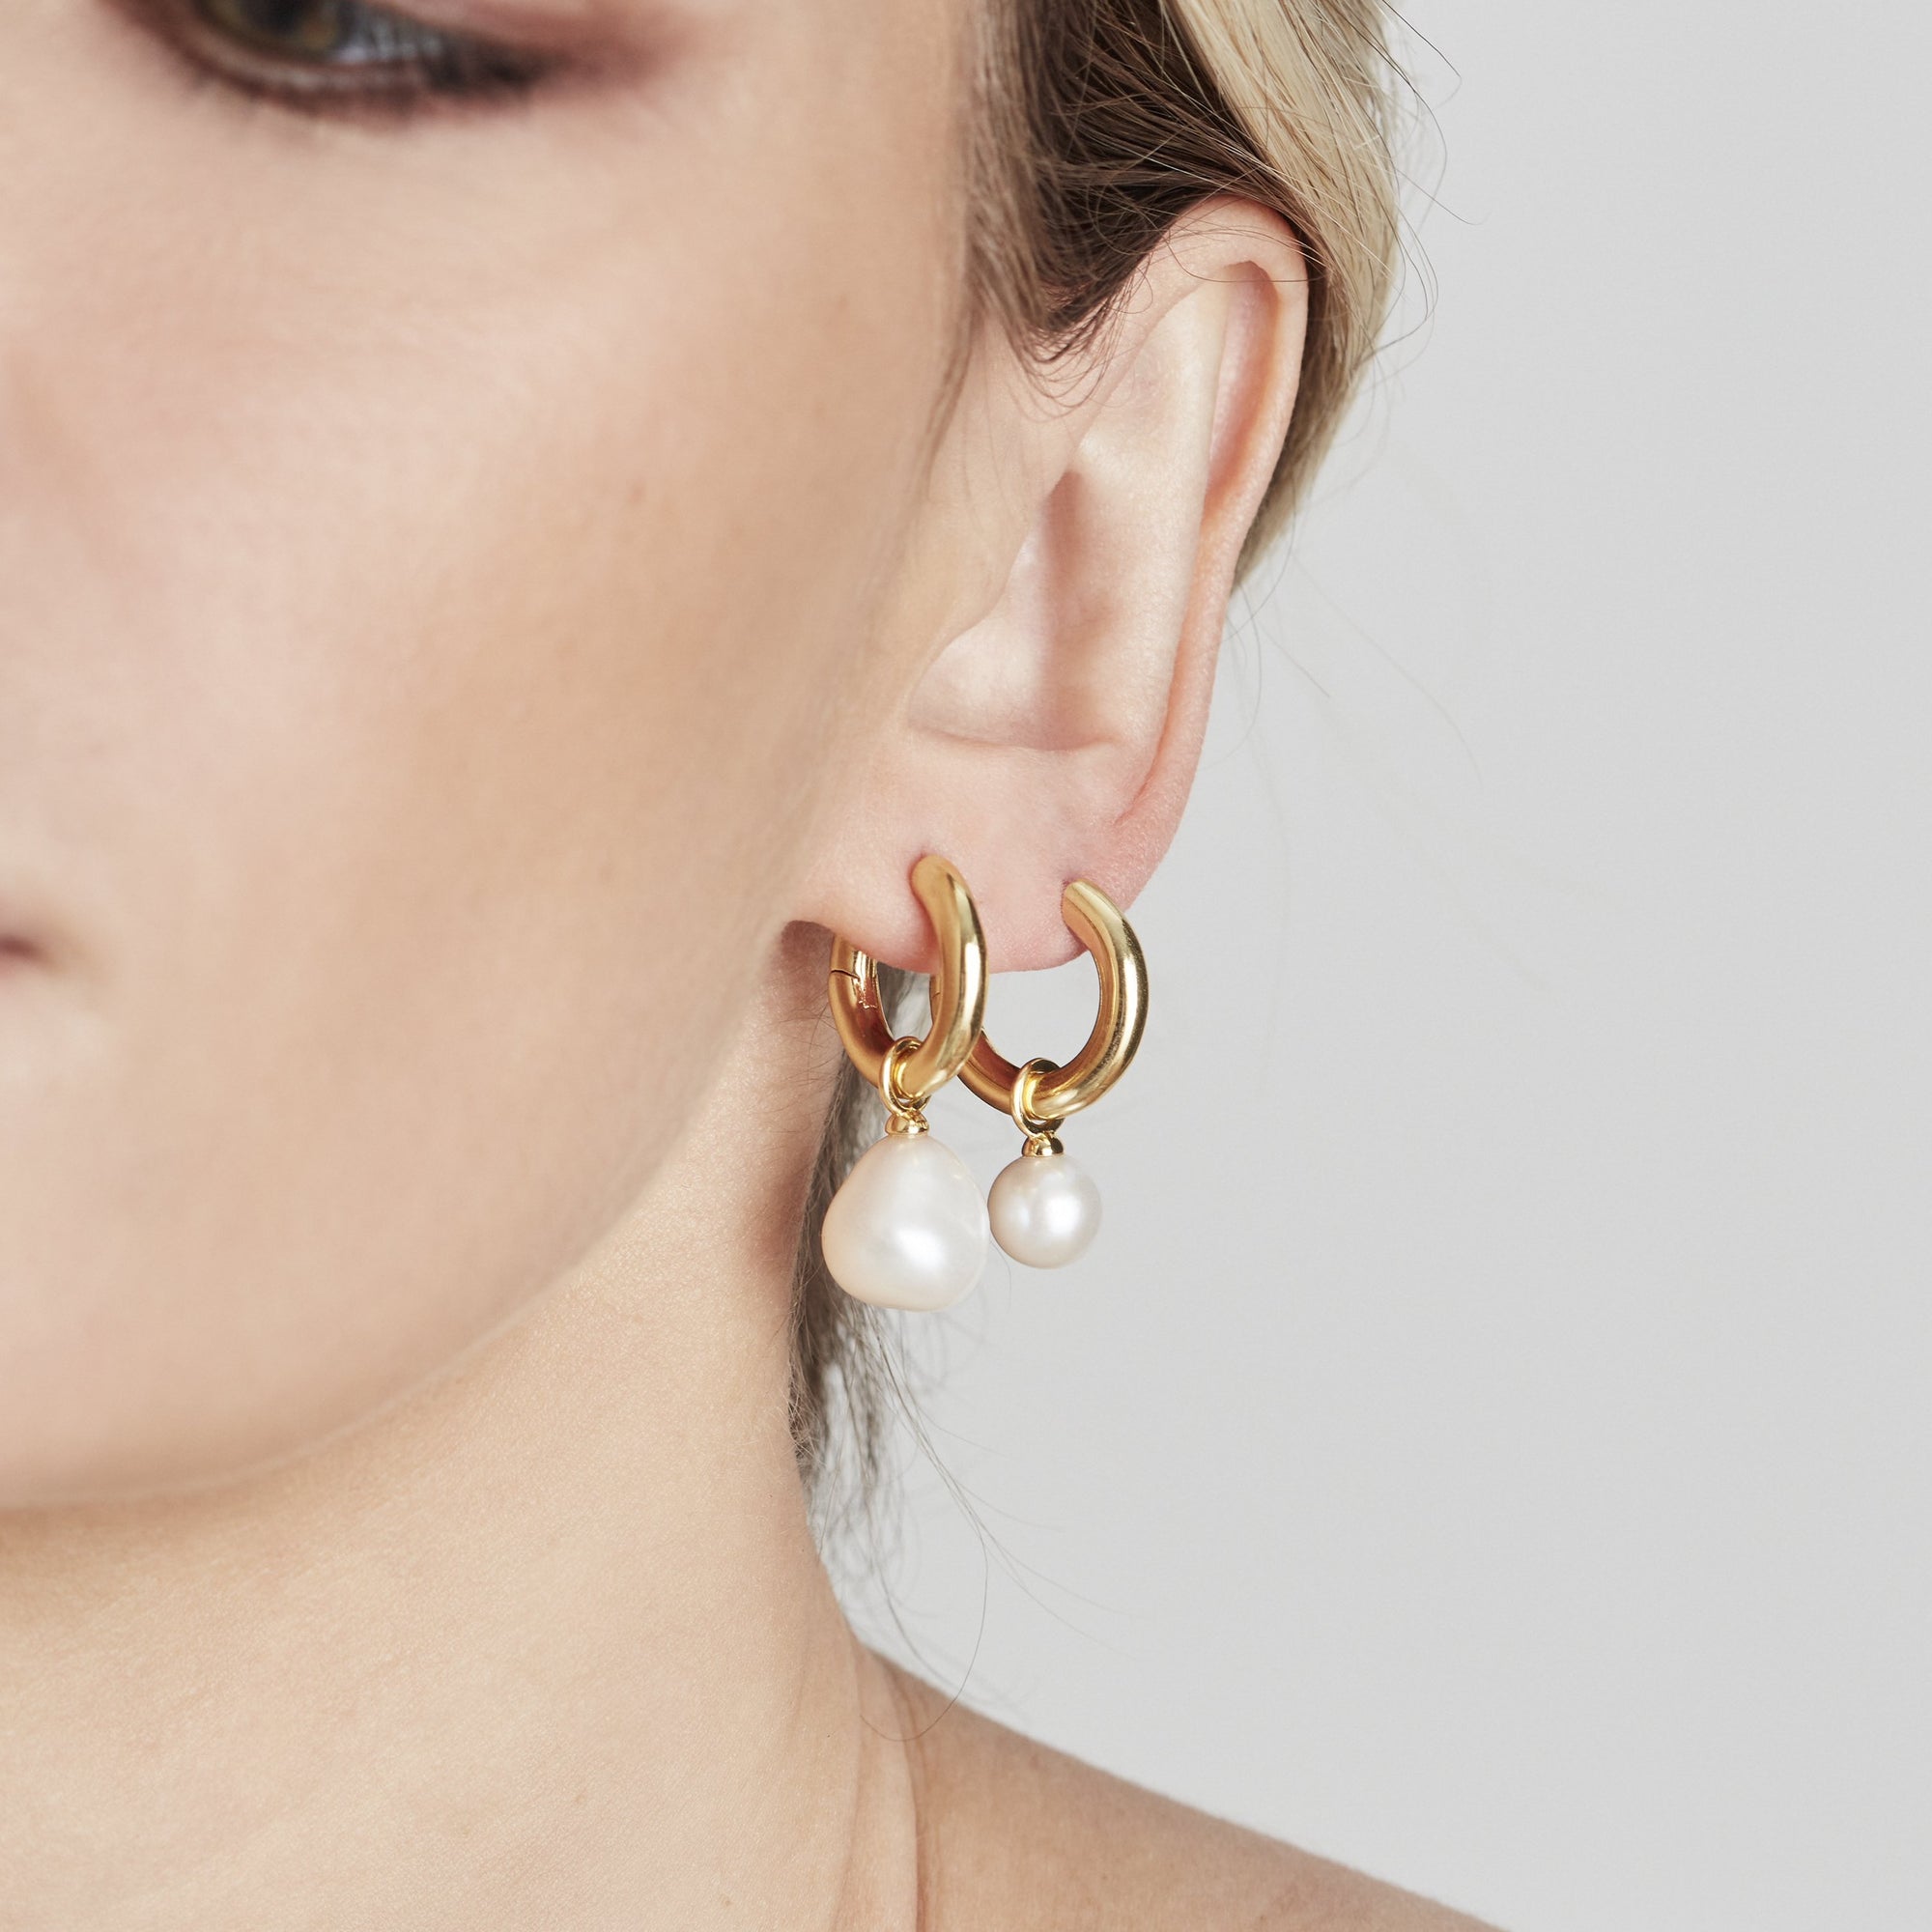 Charm Mini Hoop Mismatched Earring Set | Urban Outfitters Japan - Clothing,  Music, Home & Accessories